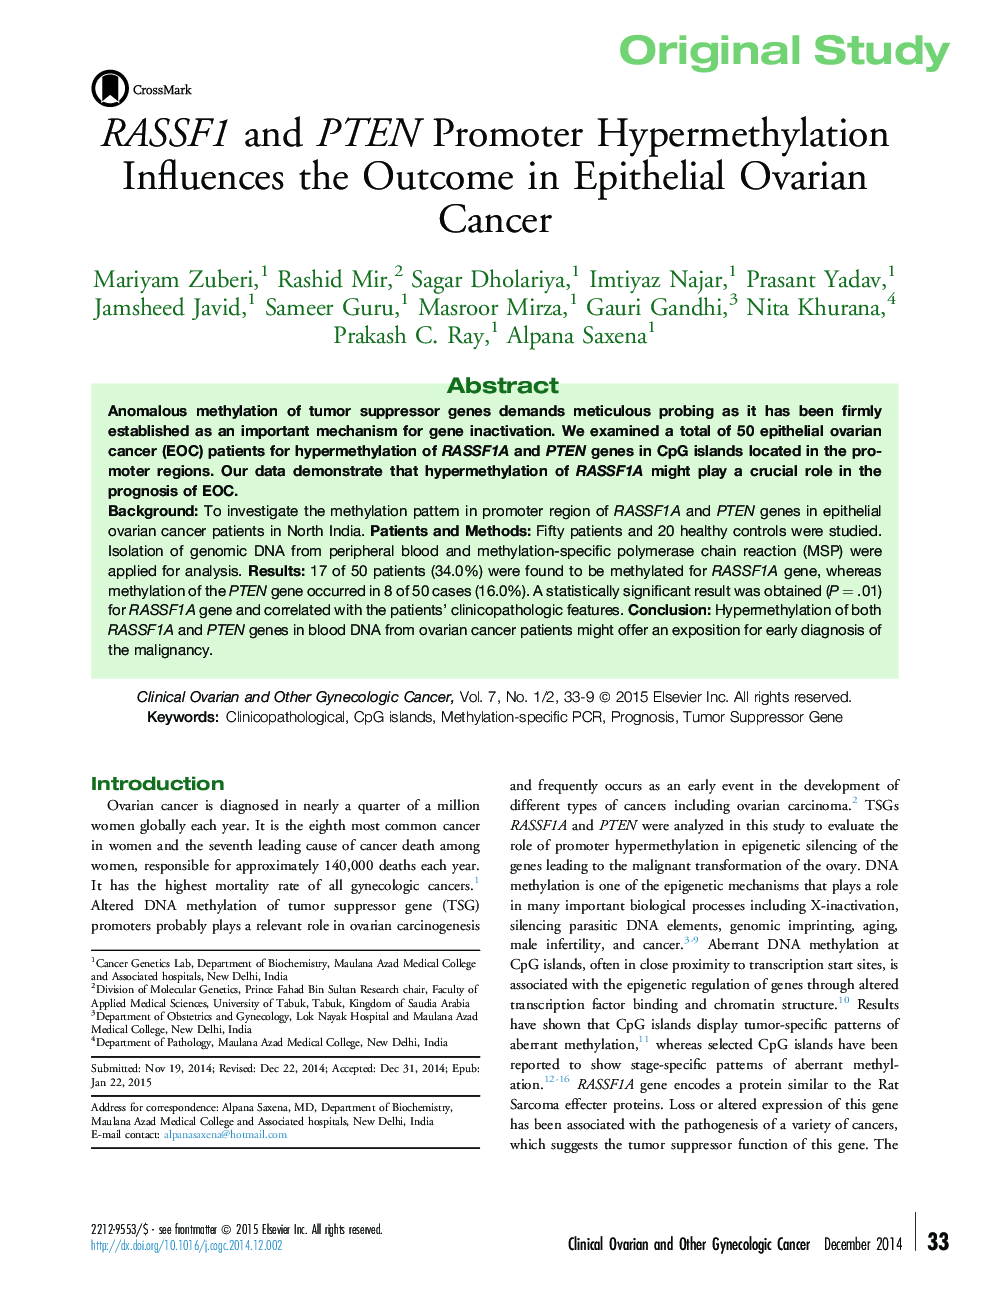 RASSF1 and PTEN Promoter Hypermethylation Influences the Outcome in Epithelial Ovarian Cancer